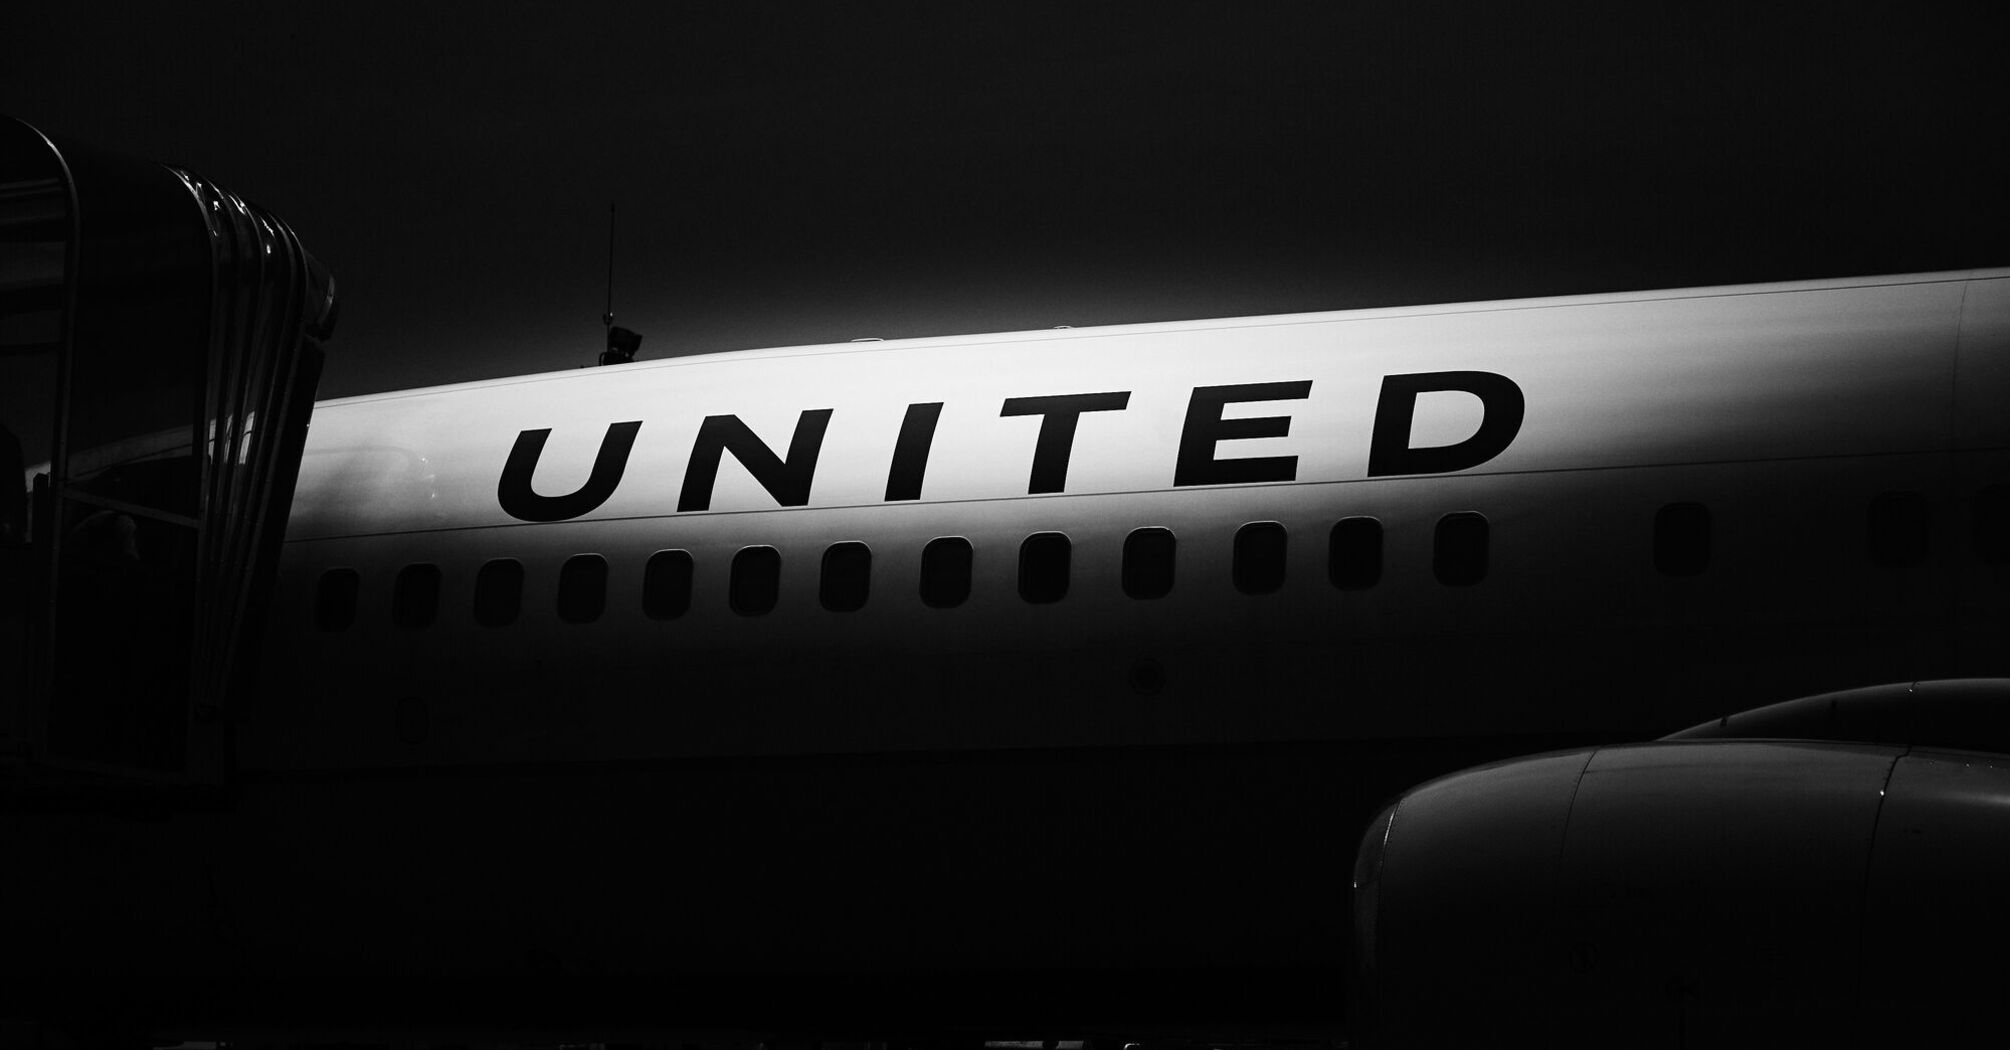 Close-up shot of a United Airlines airplane showing the word 'UNITED' on the side in black and white